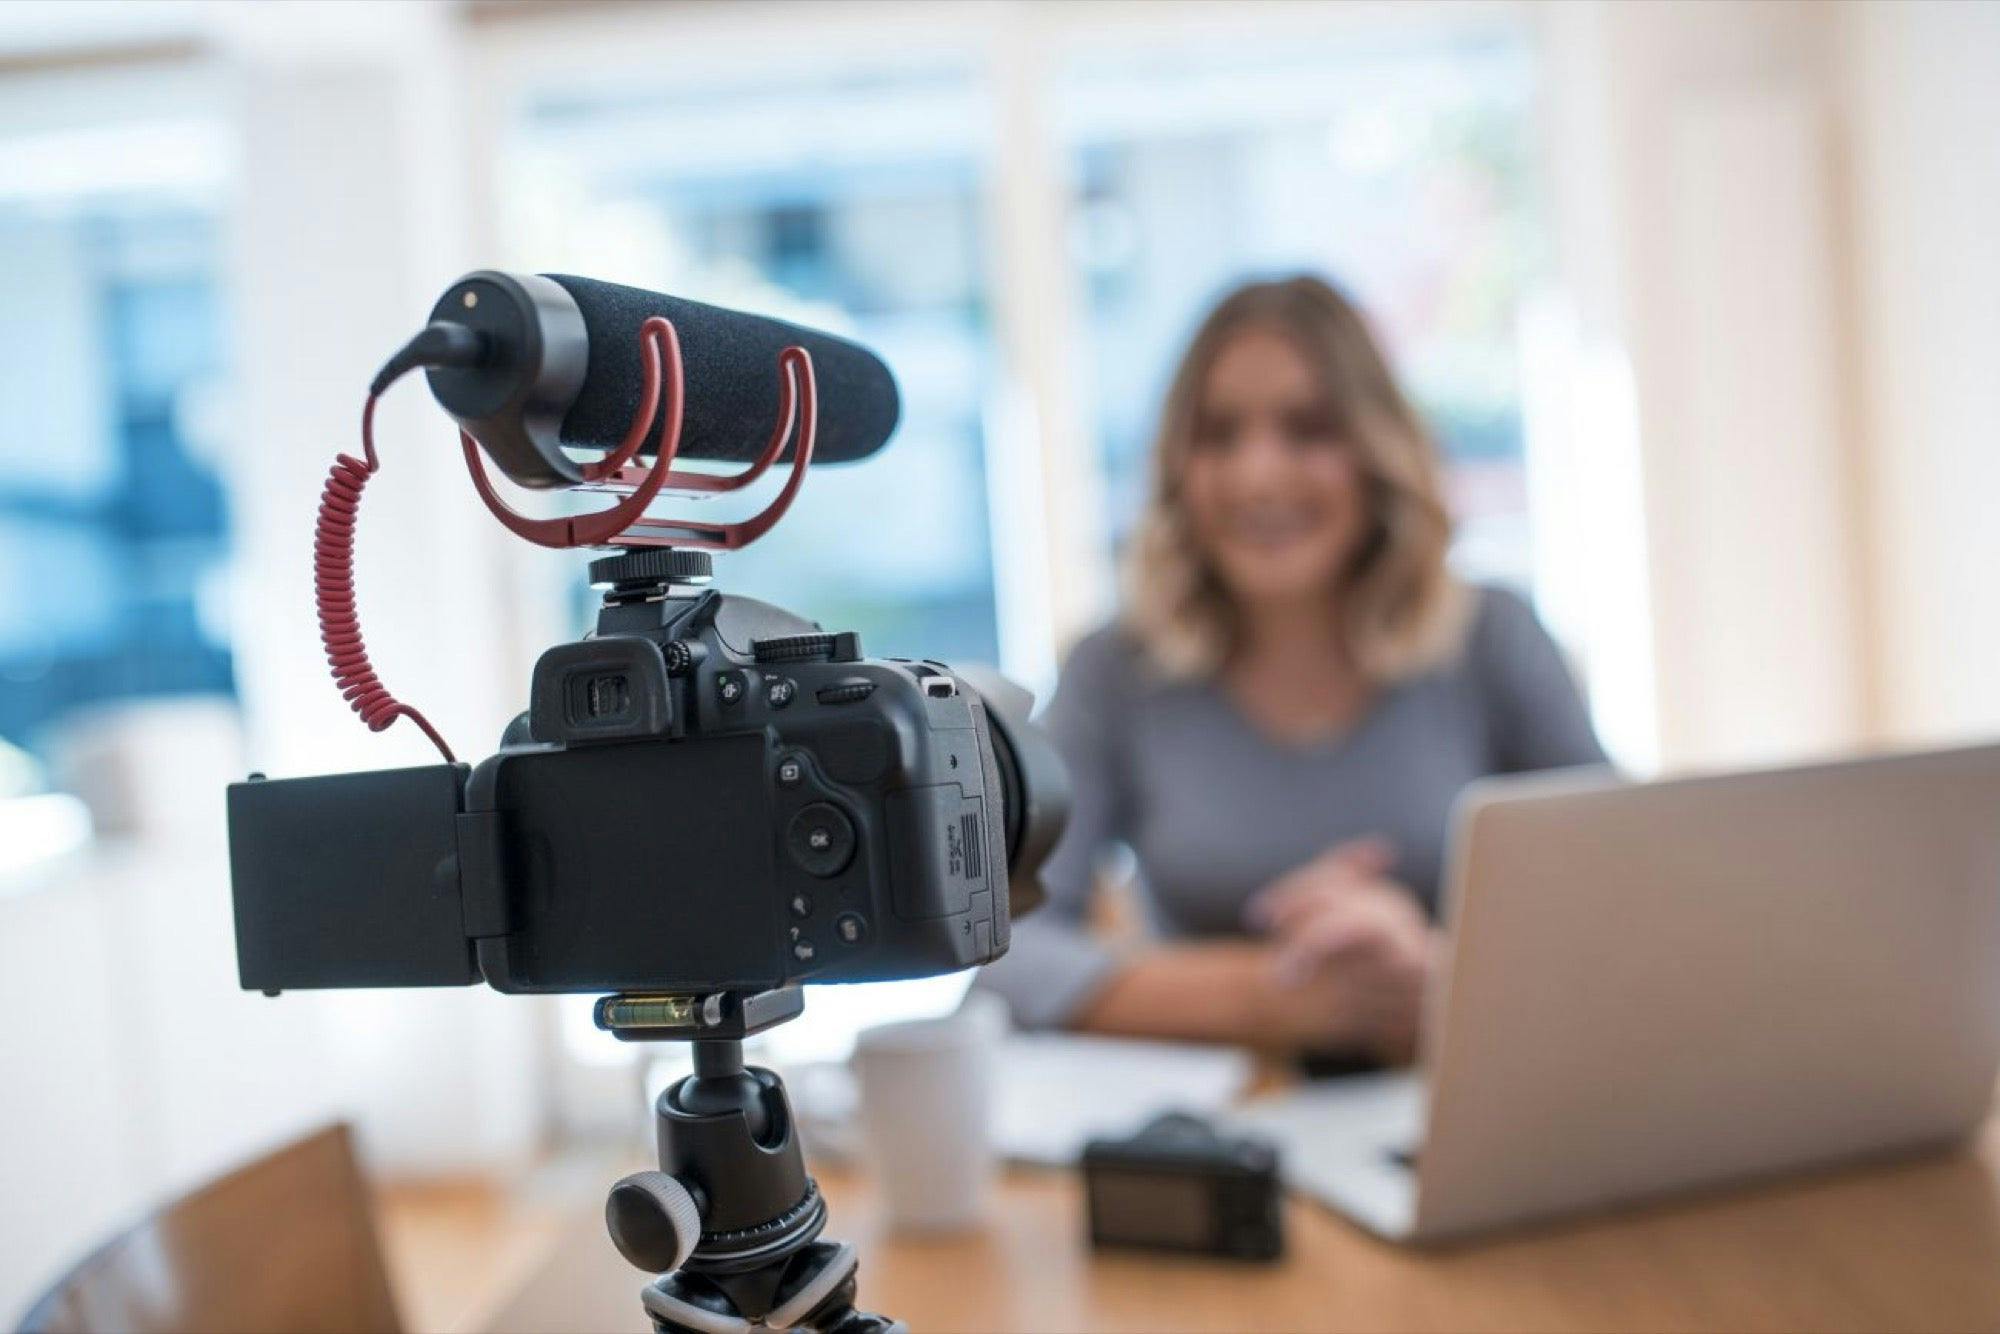 The Ins and Outs of Making a Marketing Video